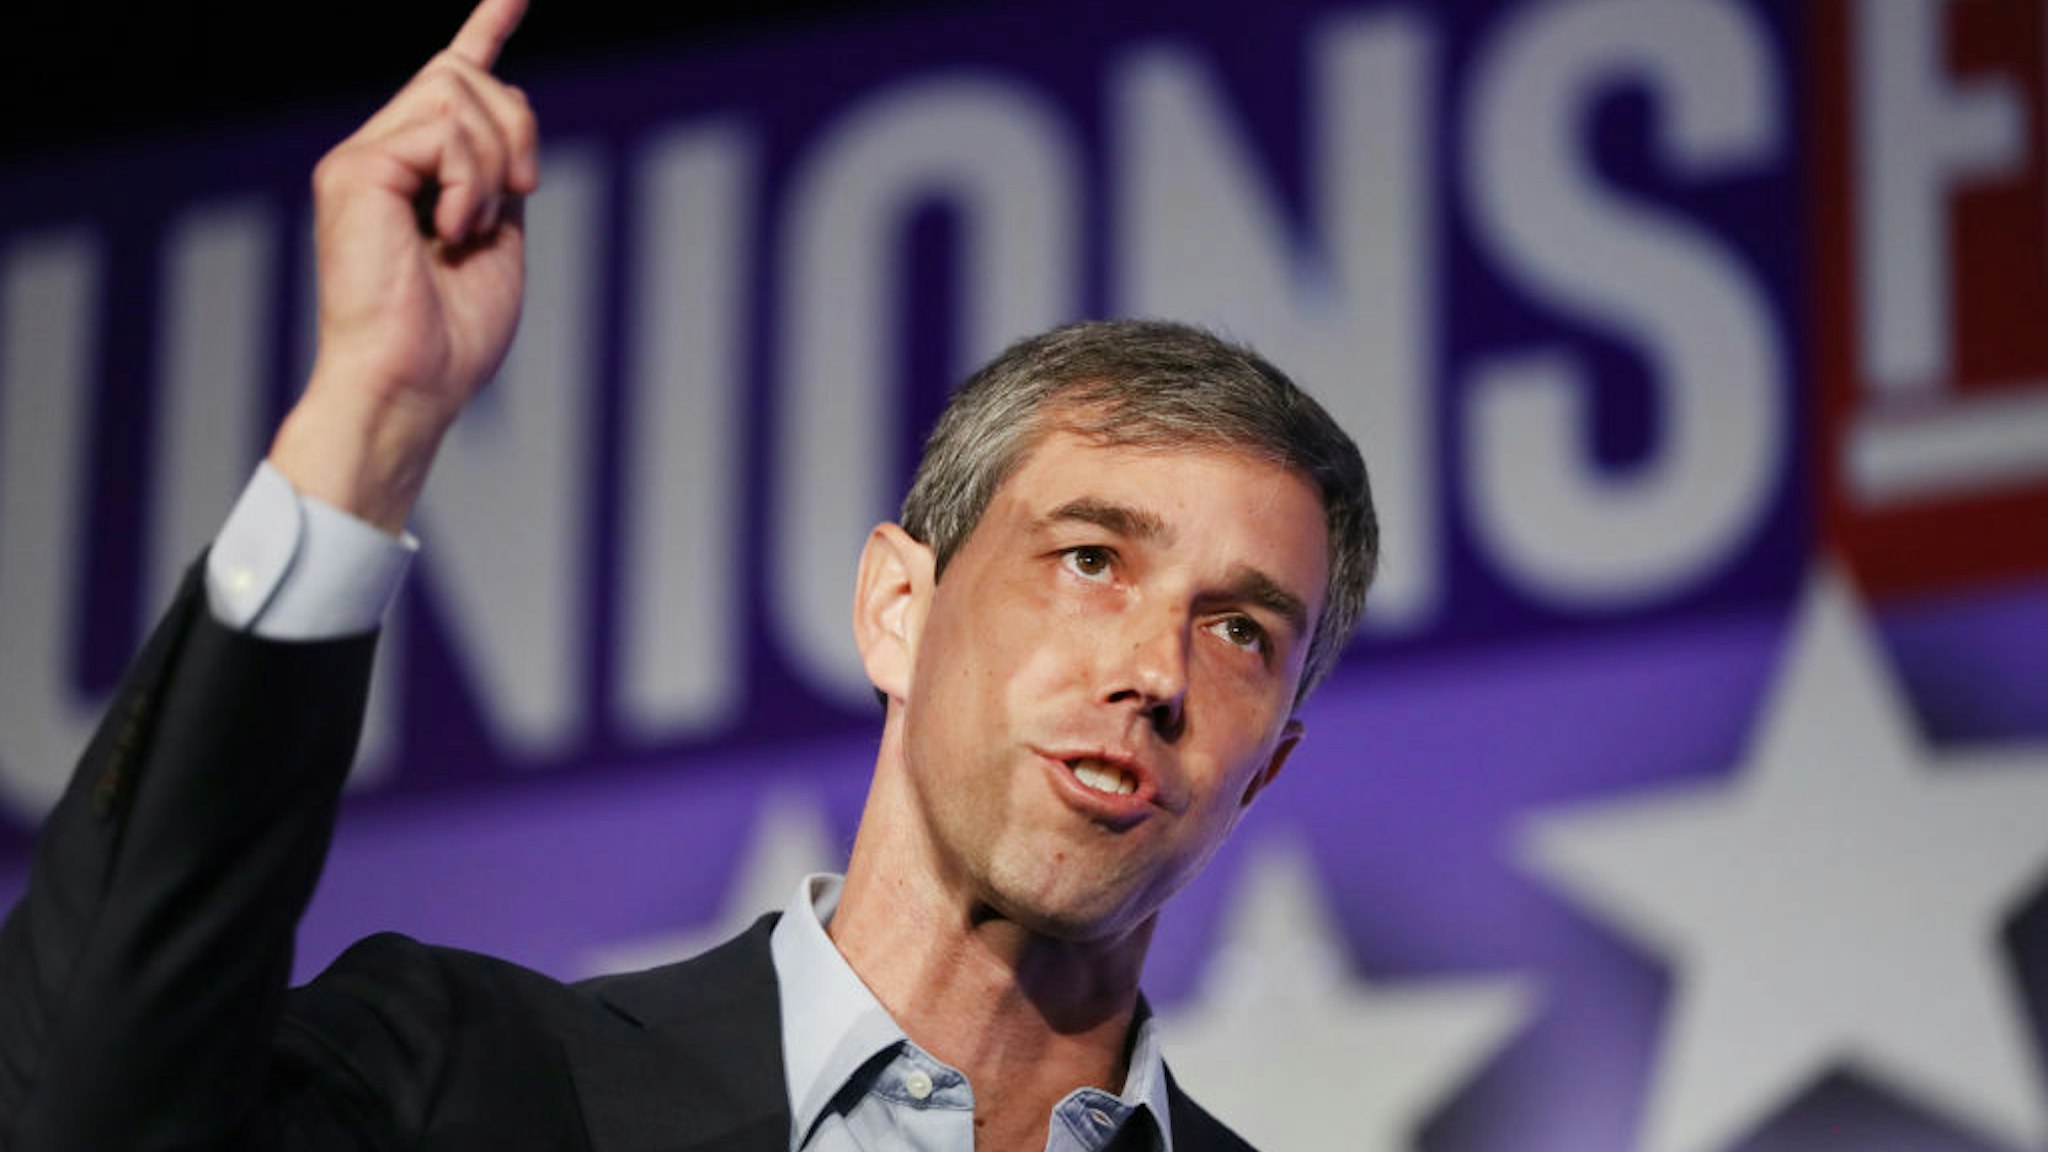 Beto O'Rourke speaks at the SEIU Unions for All Summit